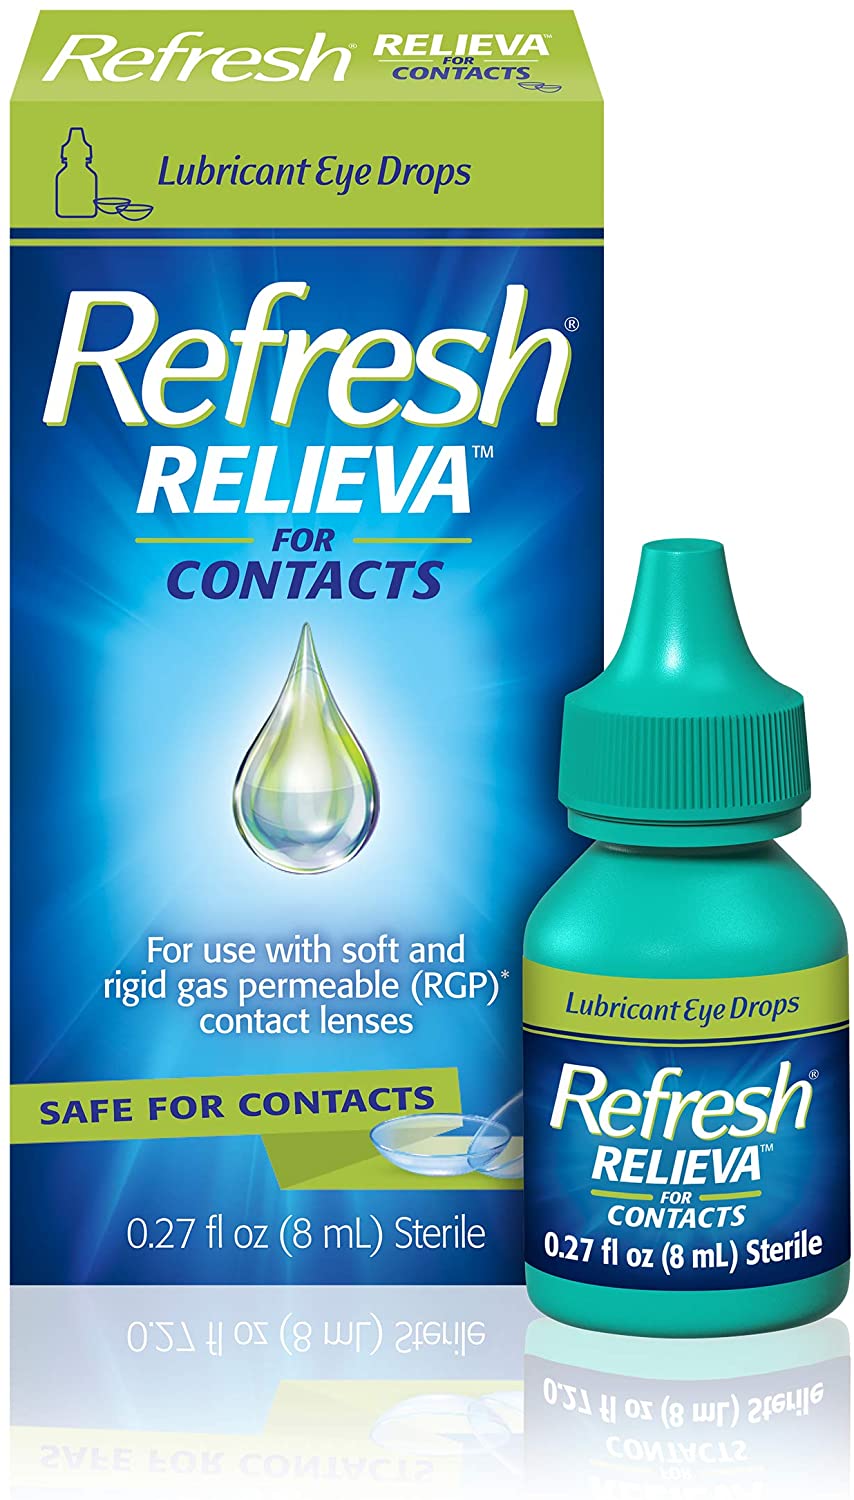 refresh relieva pf for contacts